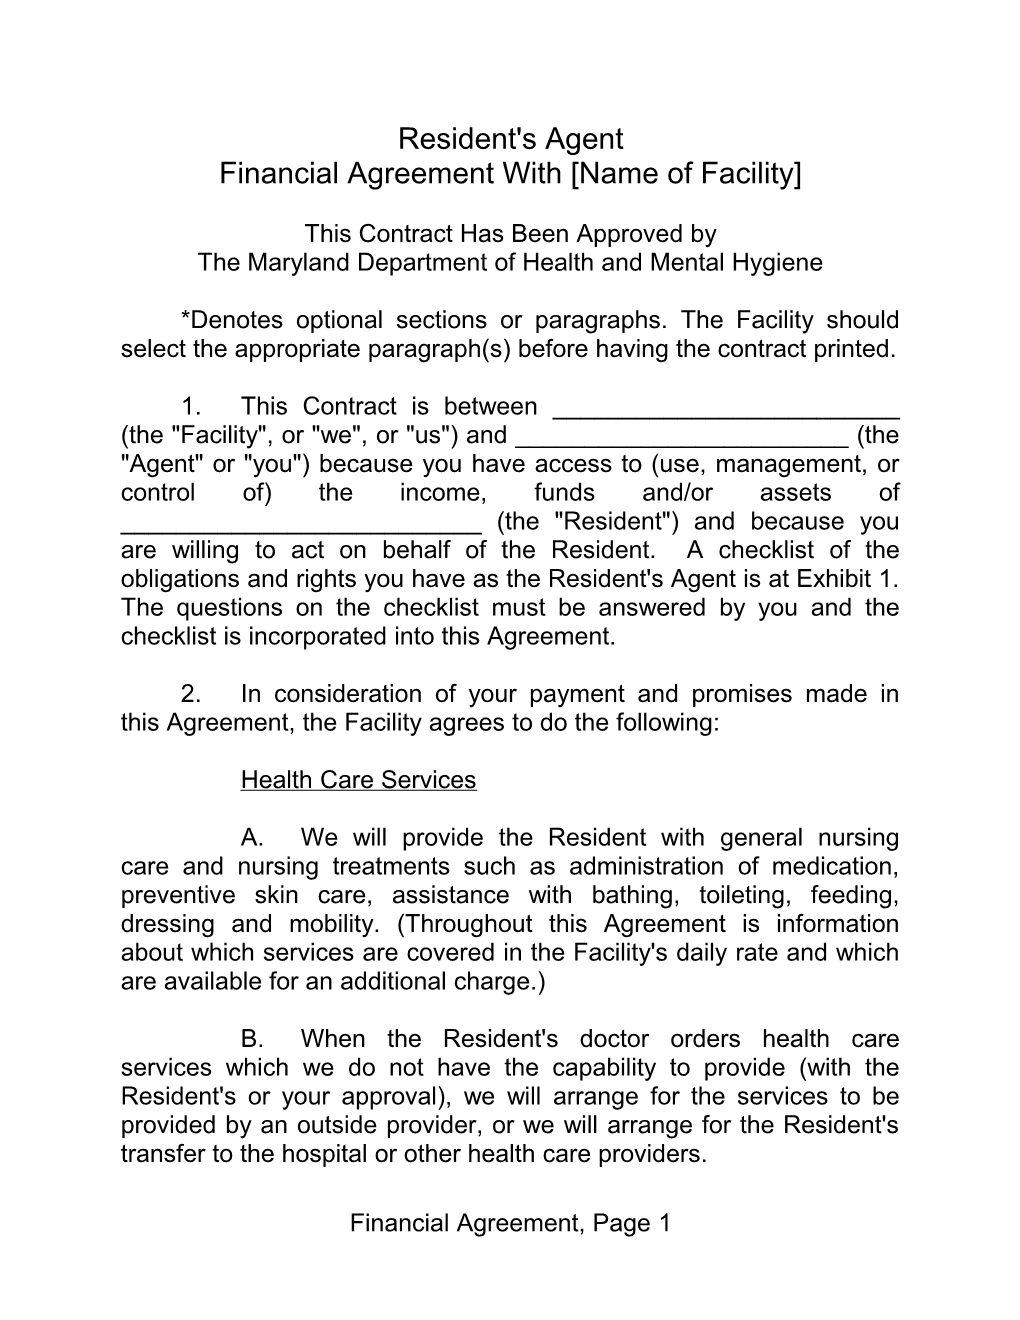 Financial Agreement with Name of Facility